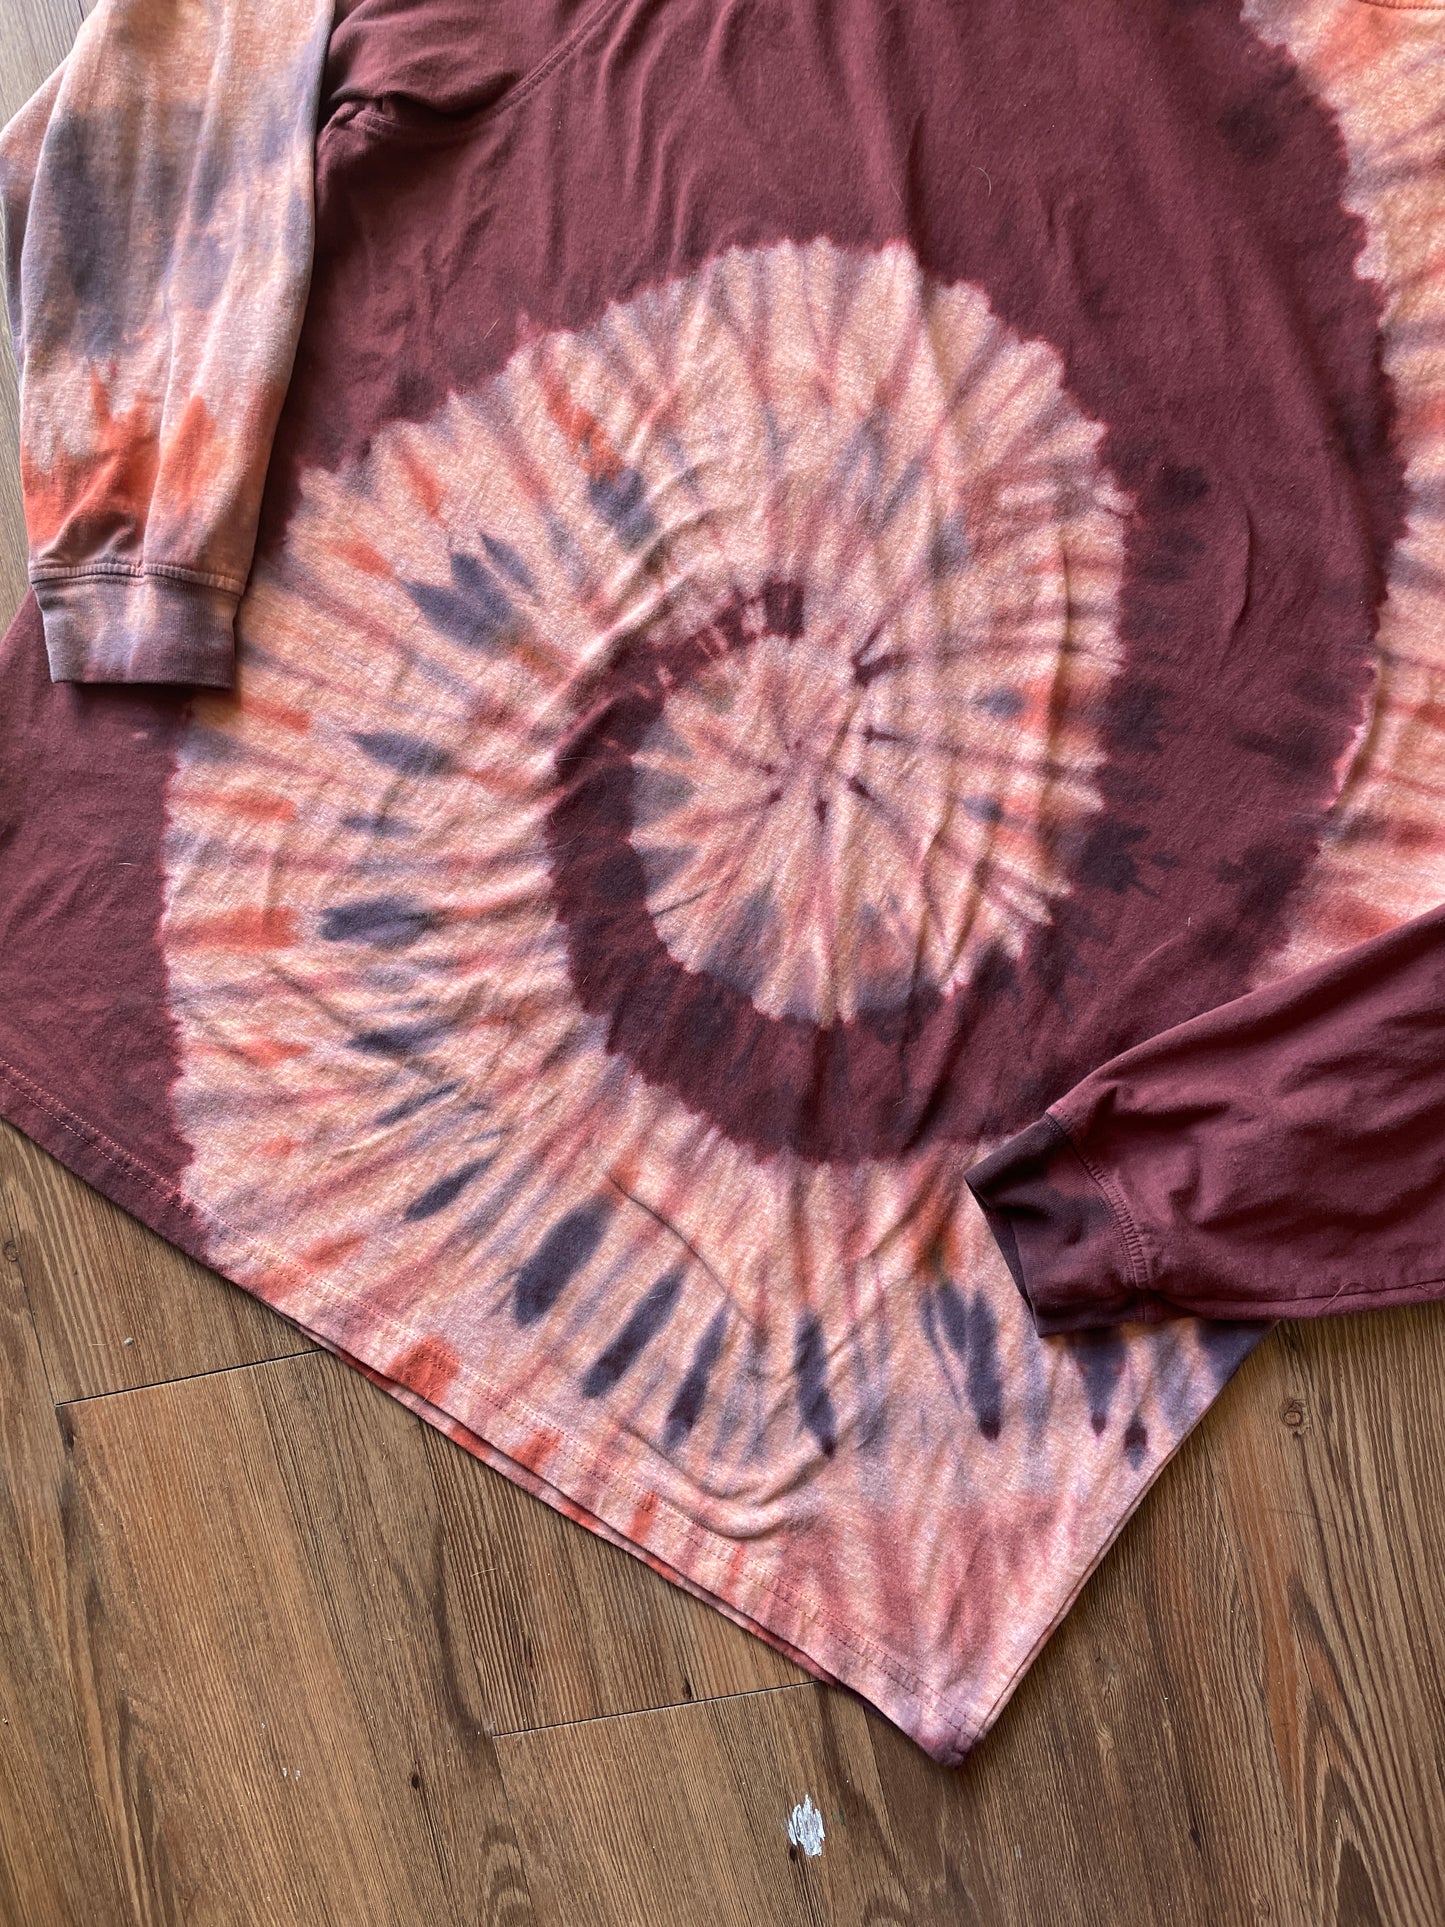 2XL Men’s Maroon and Orange Spiral Handmade Reverse Tie Dye T-Shirt | One-Of-a-Kind Warm Toned Long Sleeve